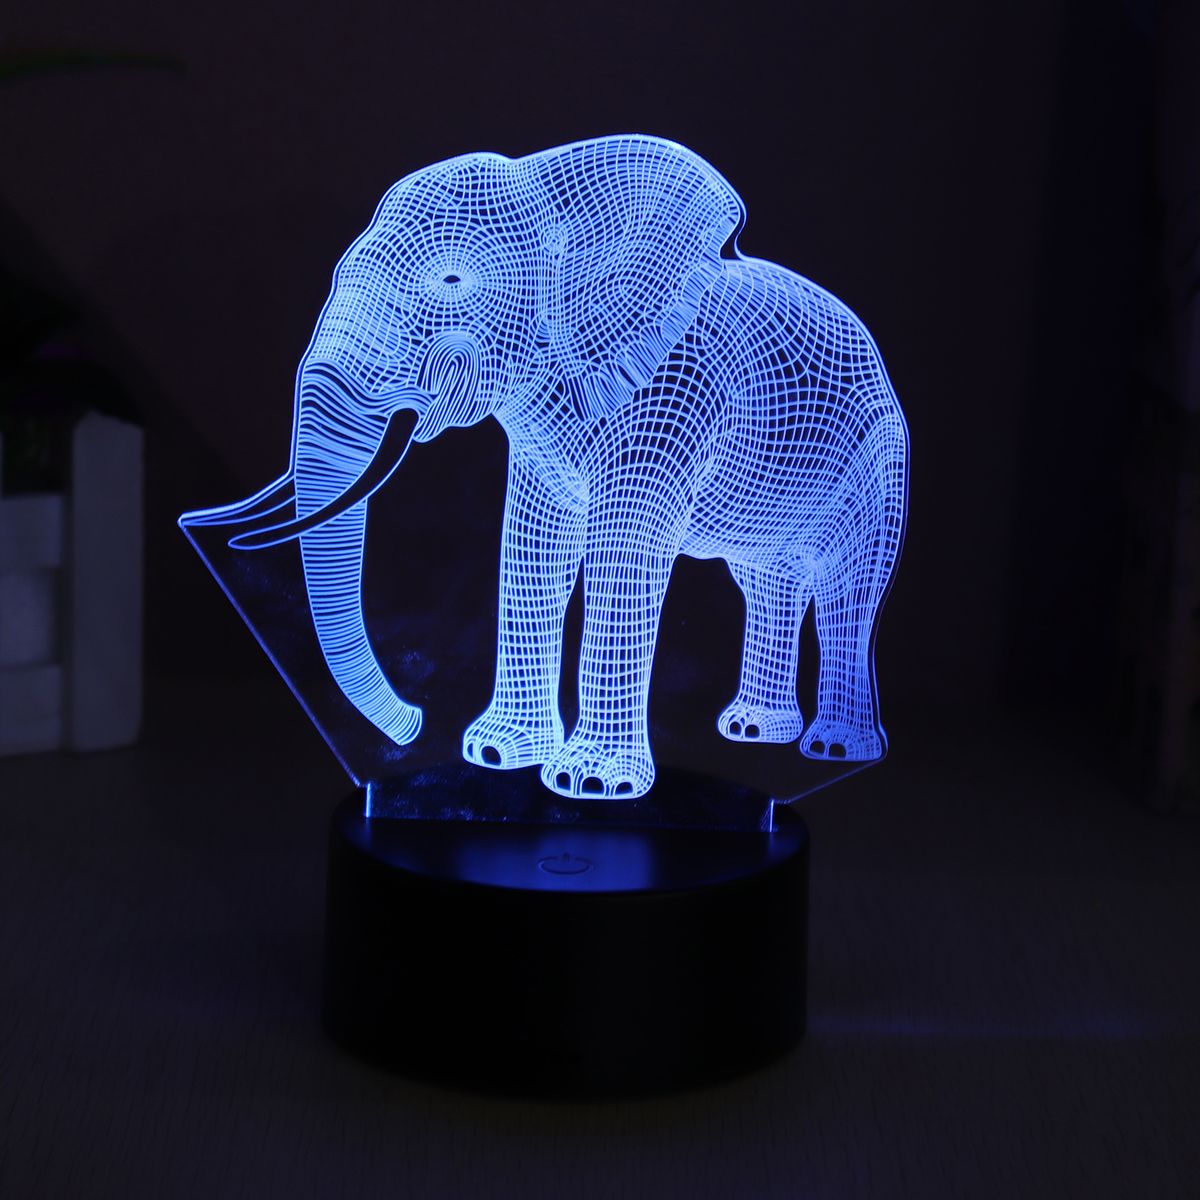 3D-Acrylic-LED-716-Colors-Colorful-Night-Lights-Elephant-Model-Remote-Control-Touch-Switch-Night-Lig-1370467-4